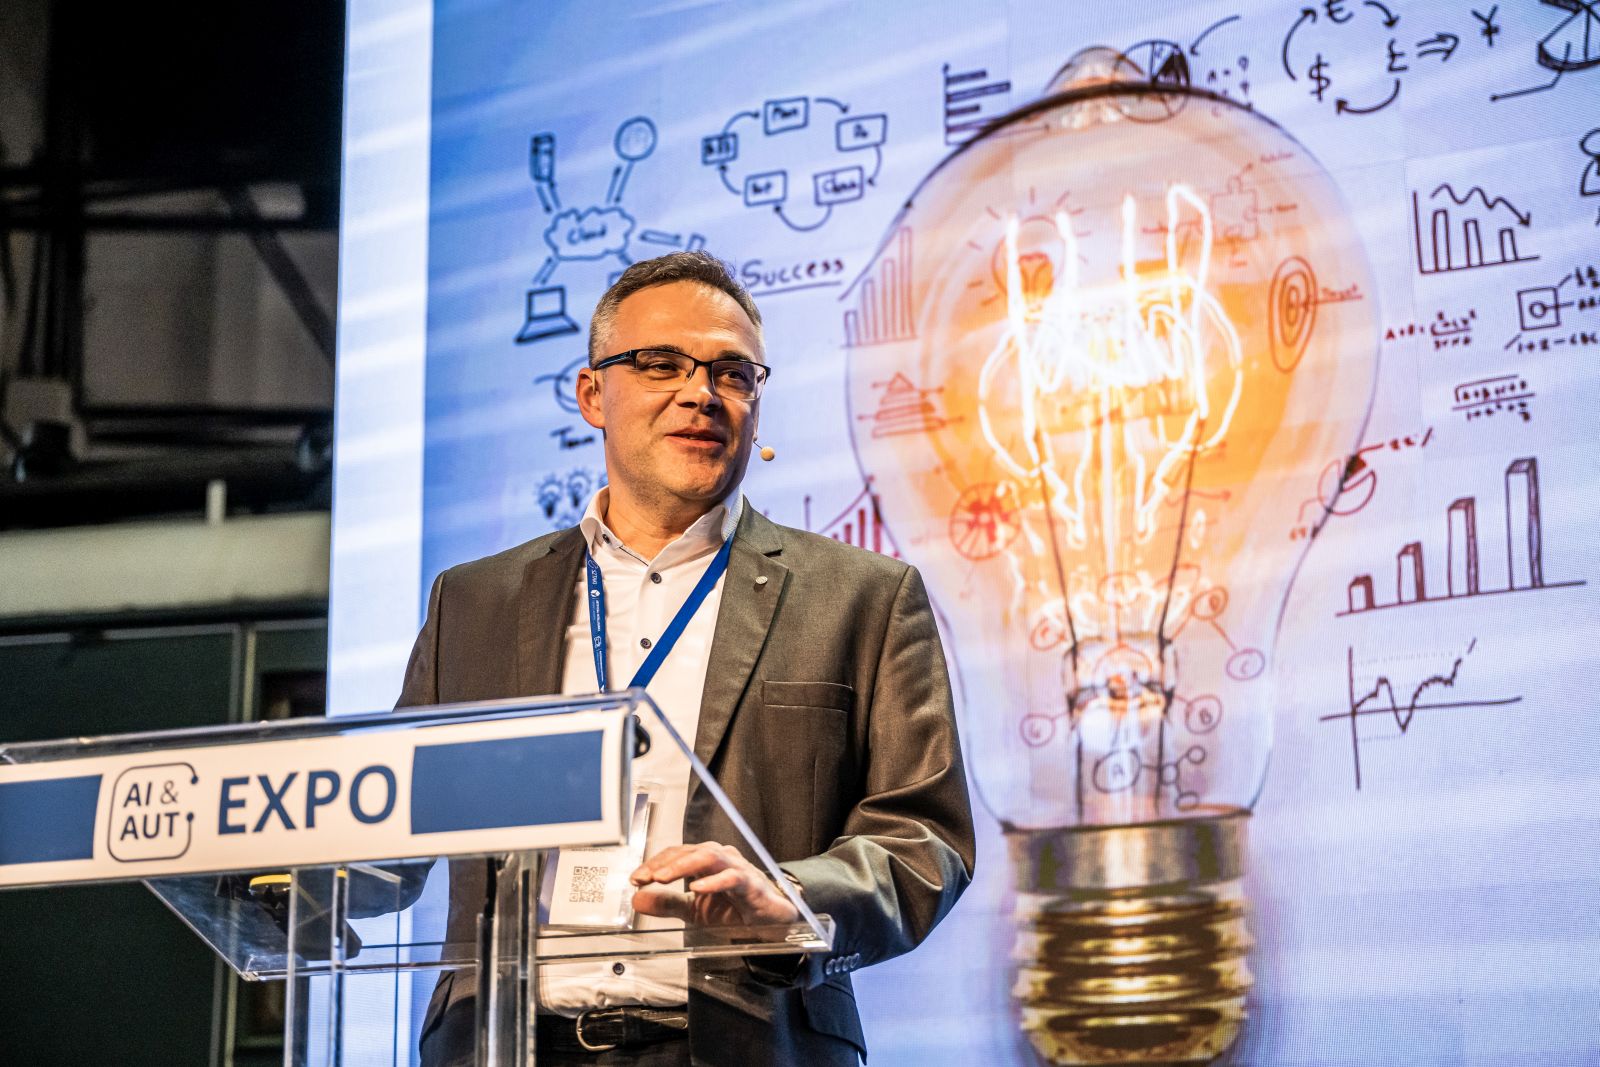 The presentation of Botond Kádár, CEO of EPIC InnoLabs at AI & Aut Expo is now available